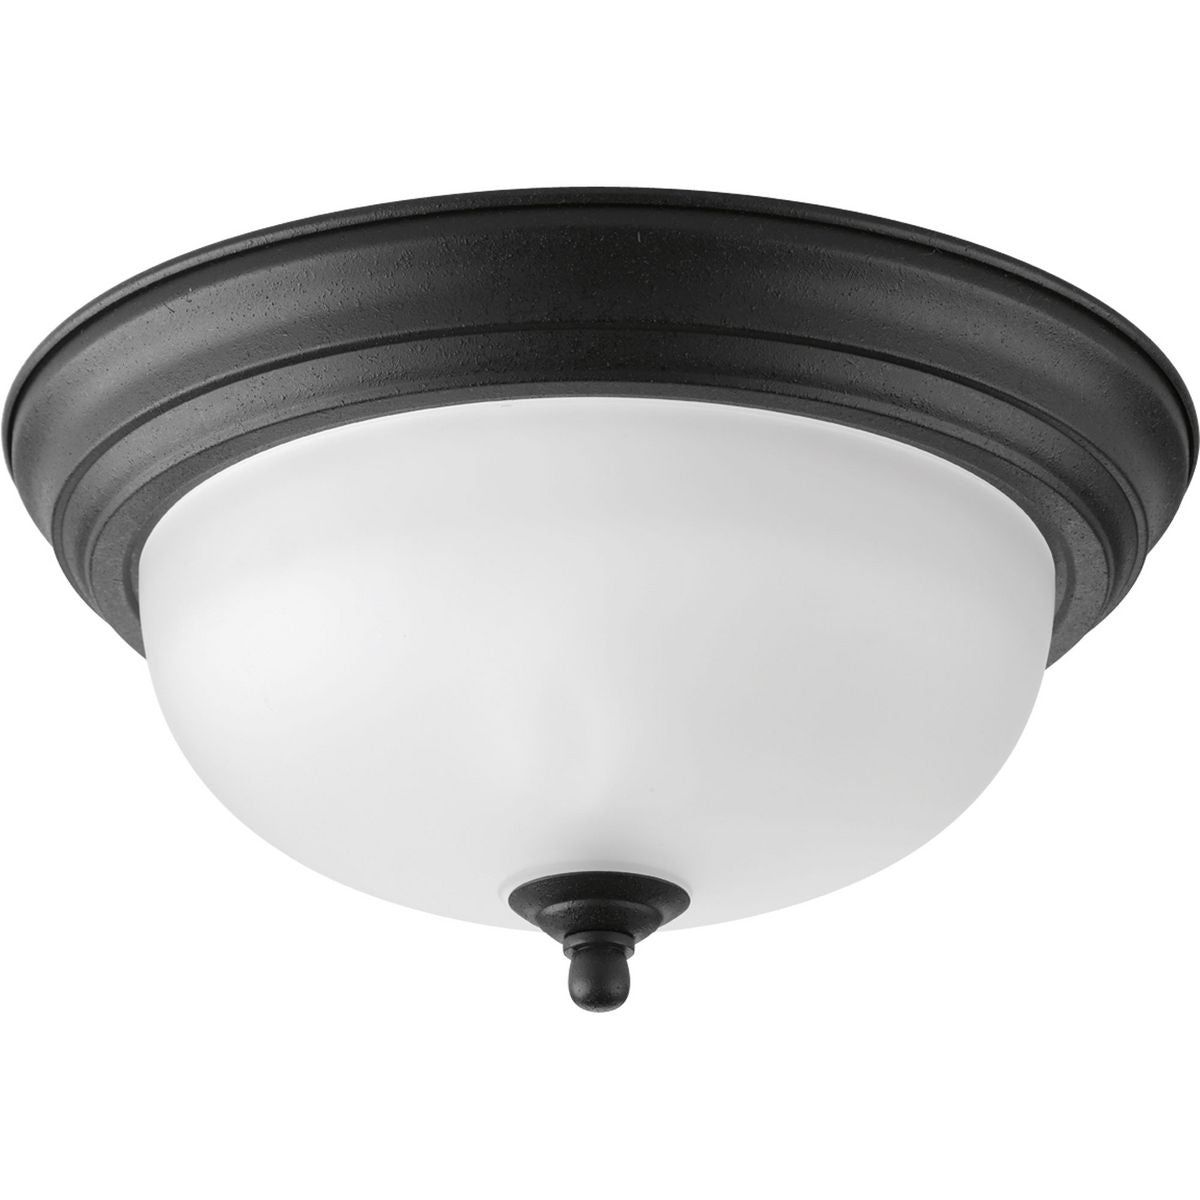 PROGRESS LIGHTING P3924-80 Forged Black One-Light Dome Glass 11-3/8" Close-to-Ceiling